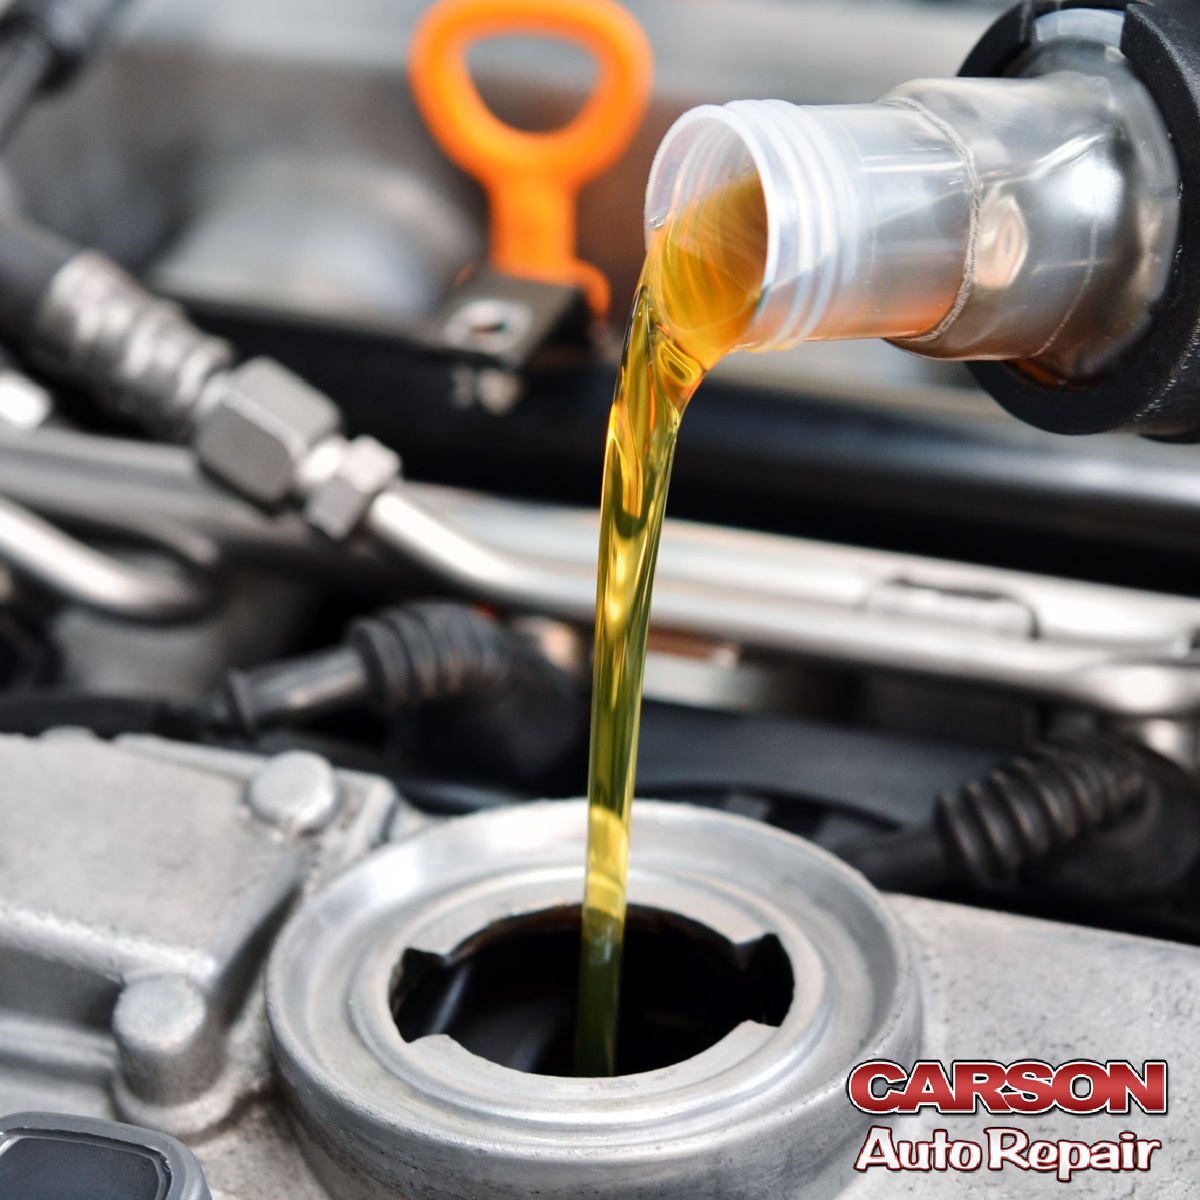 Call to Schedule Oil Changes and Fuel System Inspections